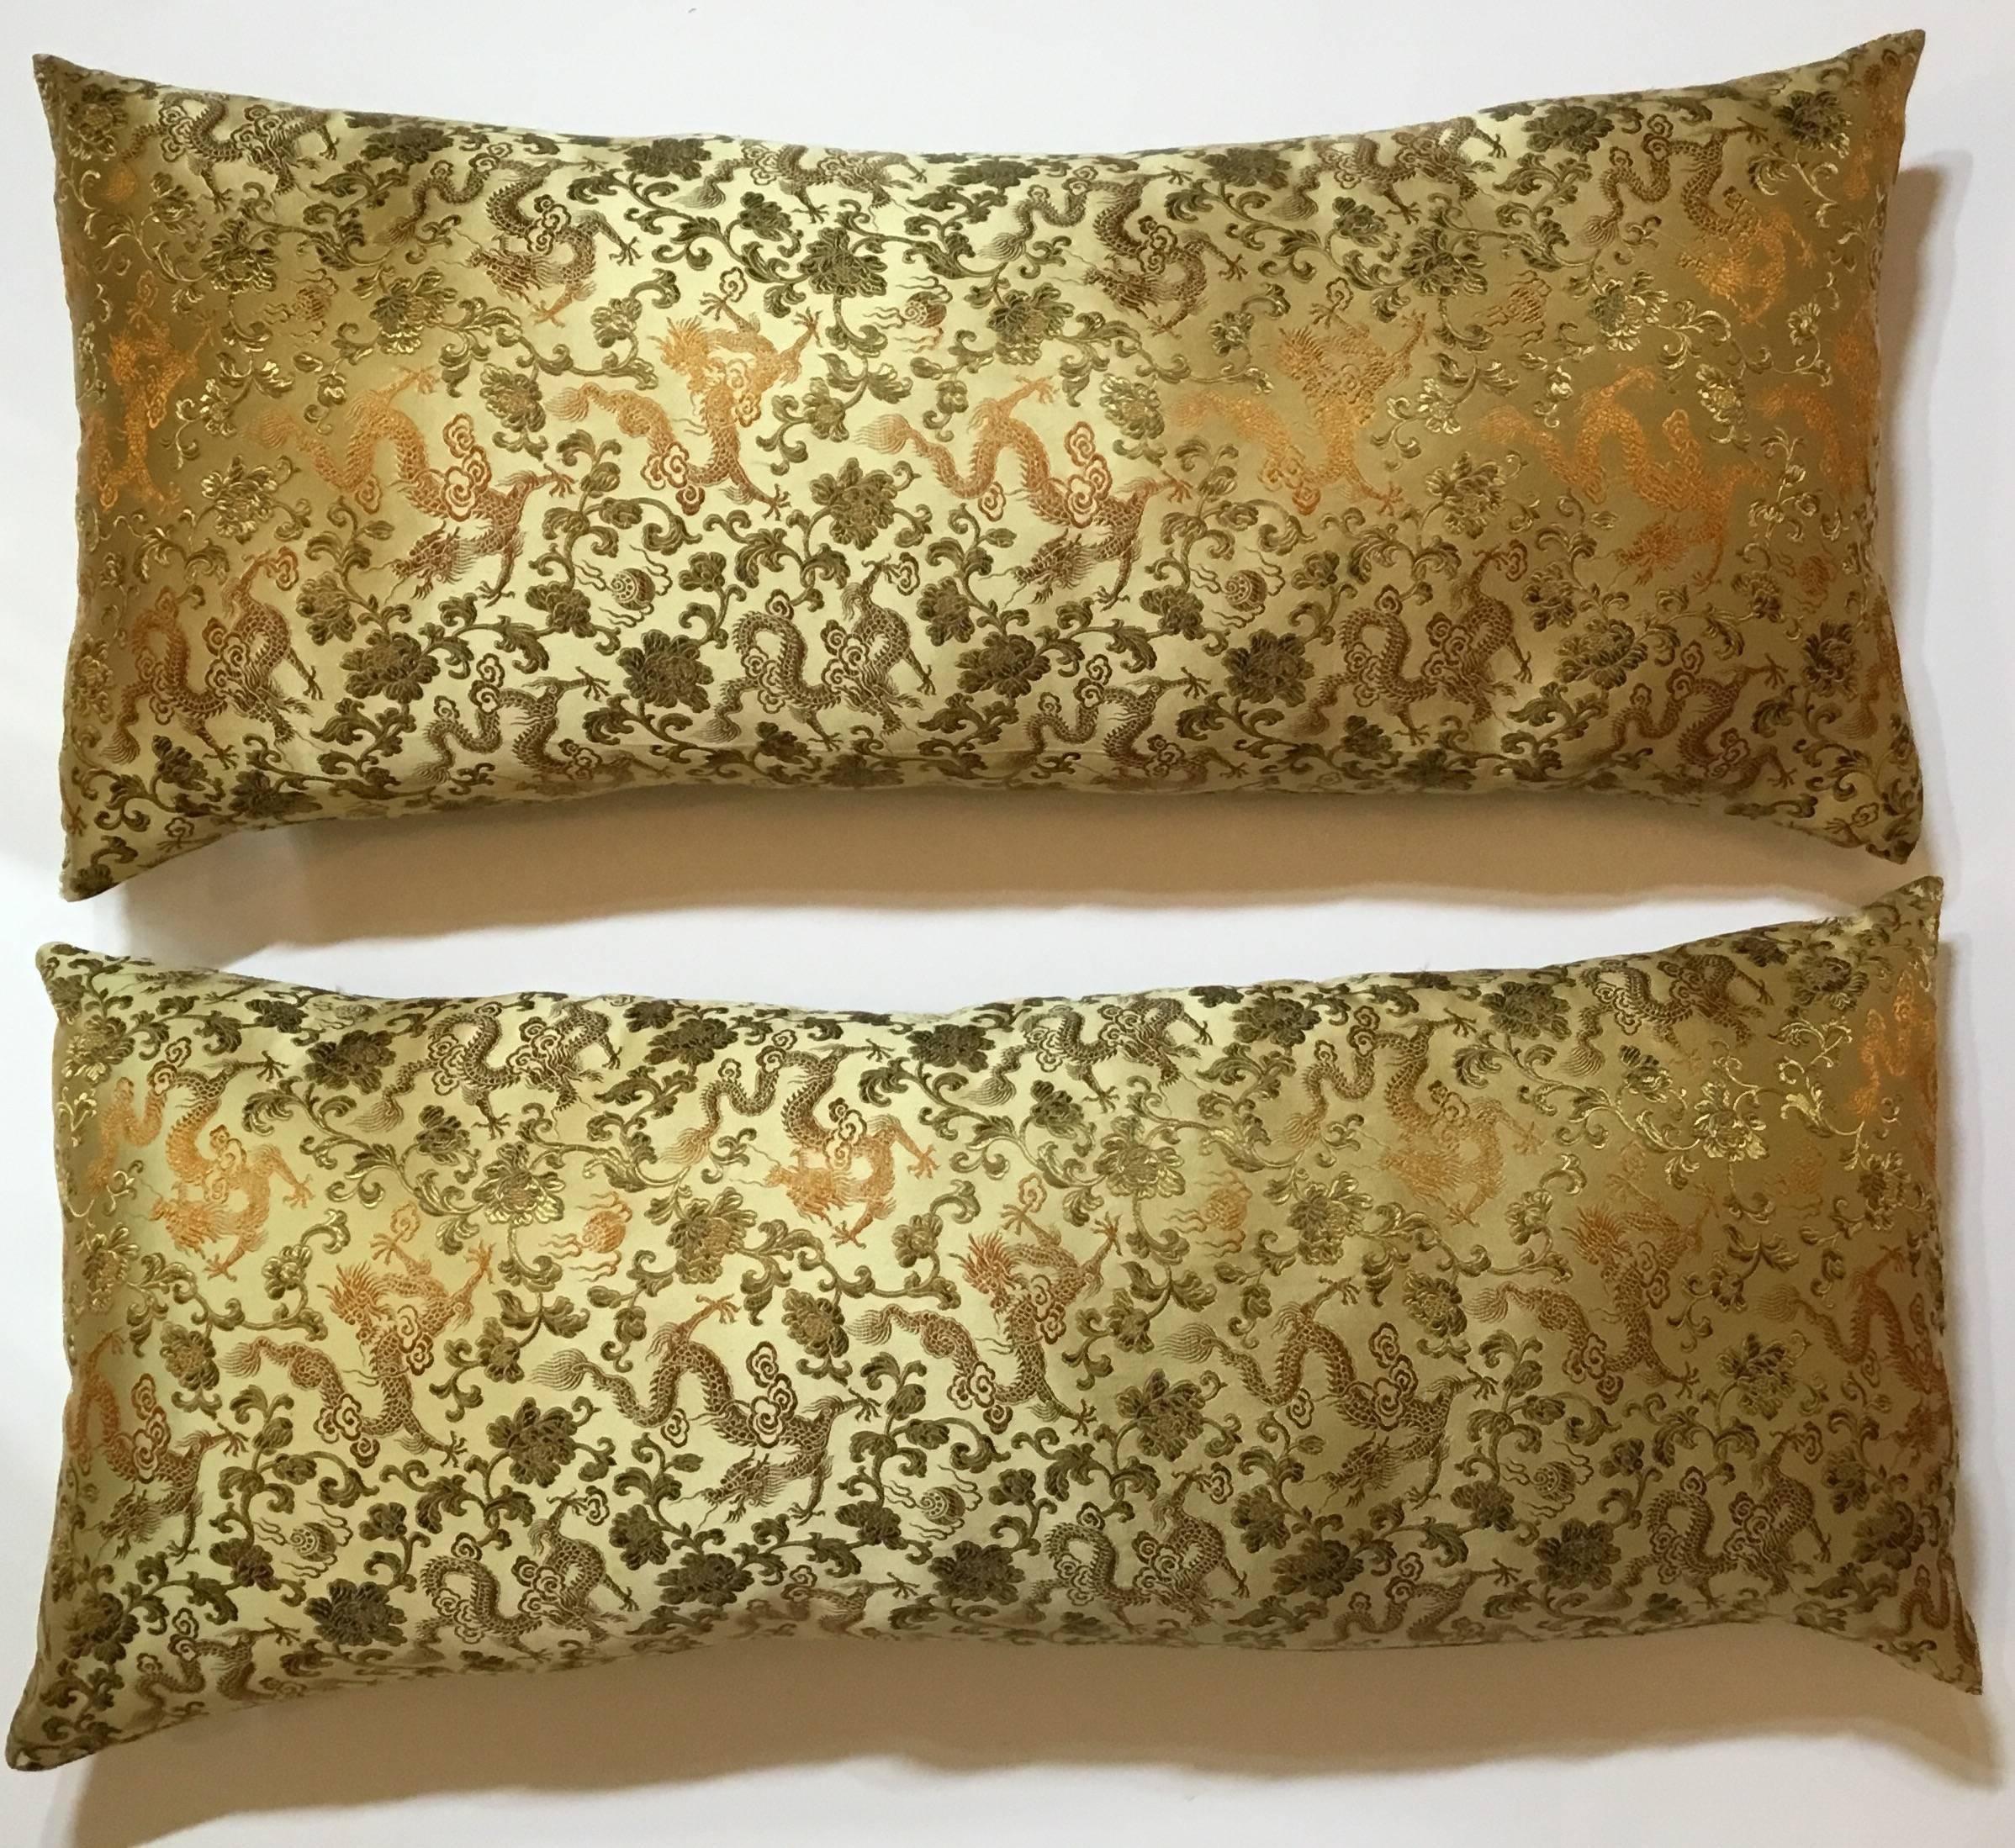 Pair of beautiful pillow made of vintage silk Chinese textile, all around .with elegant motifs of flowers and Chinese dragon on gold colors background.
Fresh inserts.